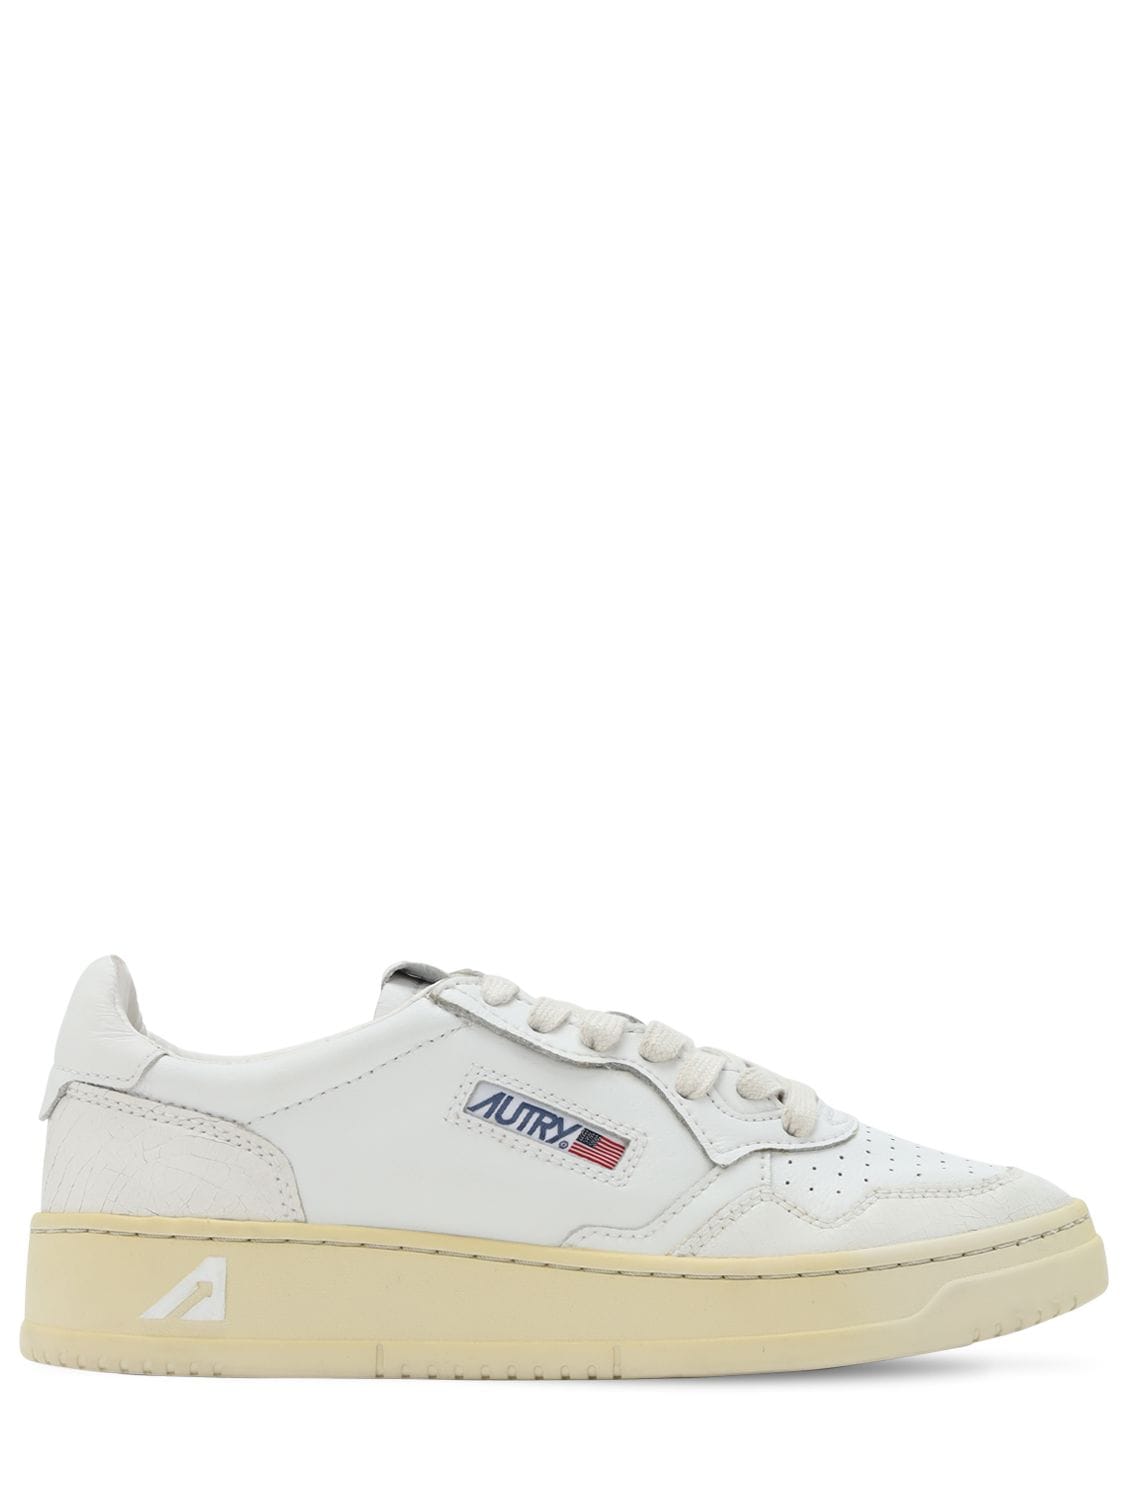 Autry Virgin Leather Cracklè Low Sneakers In White